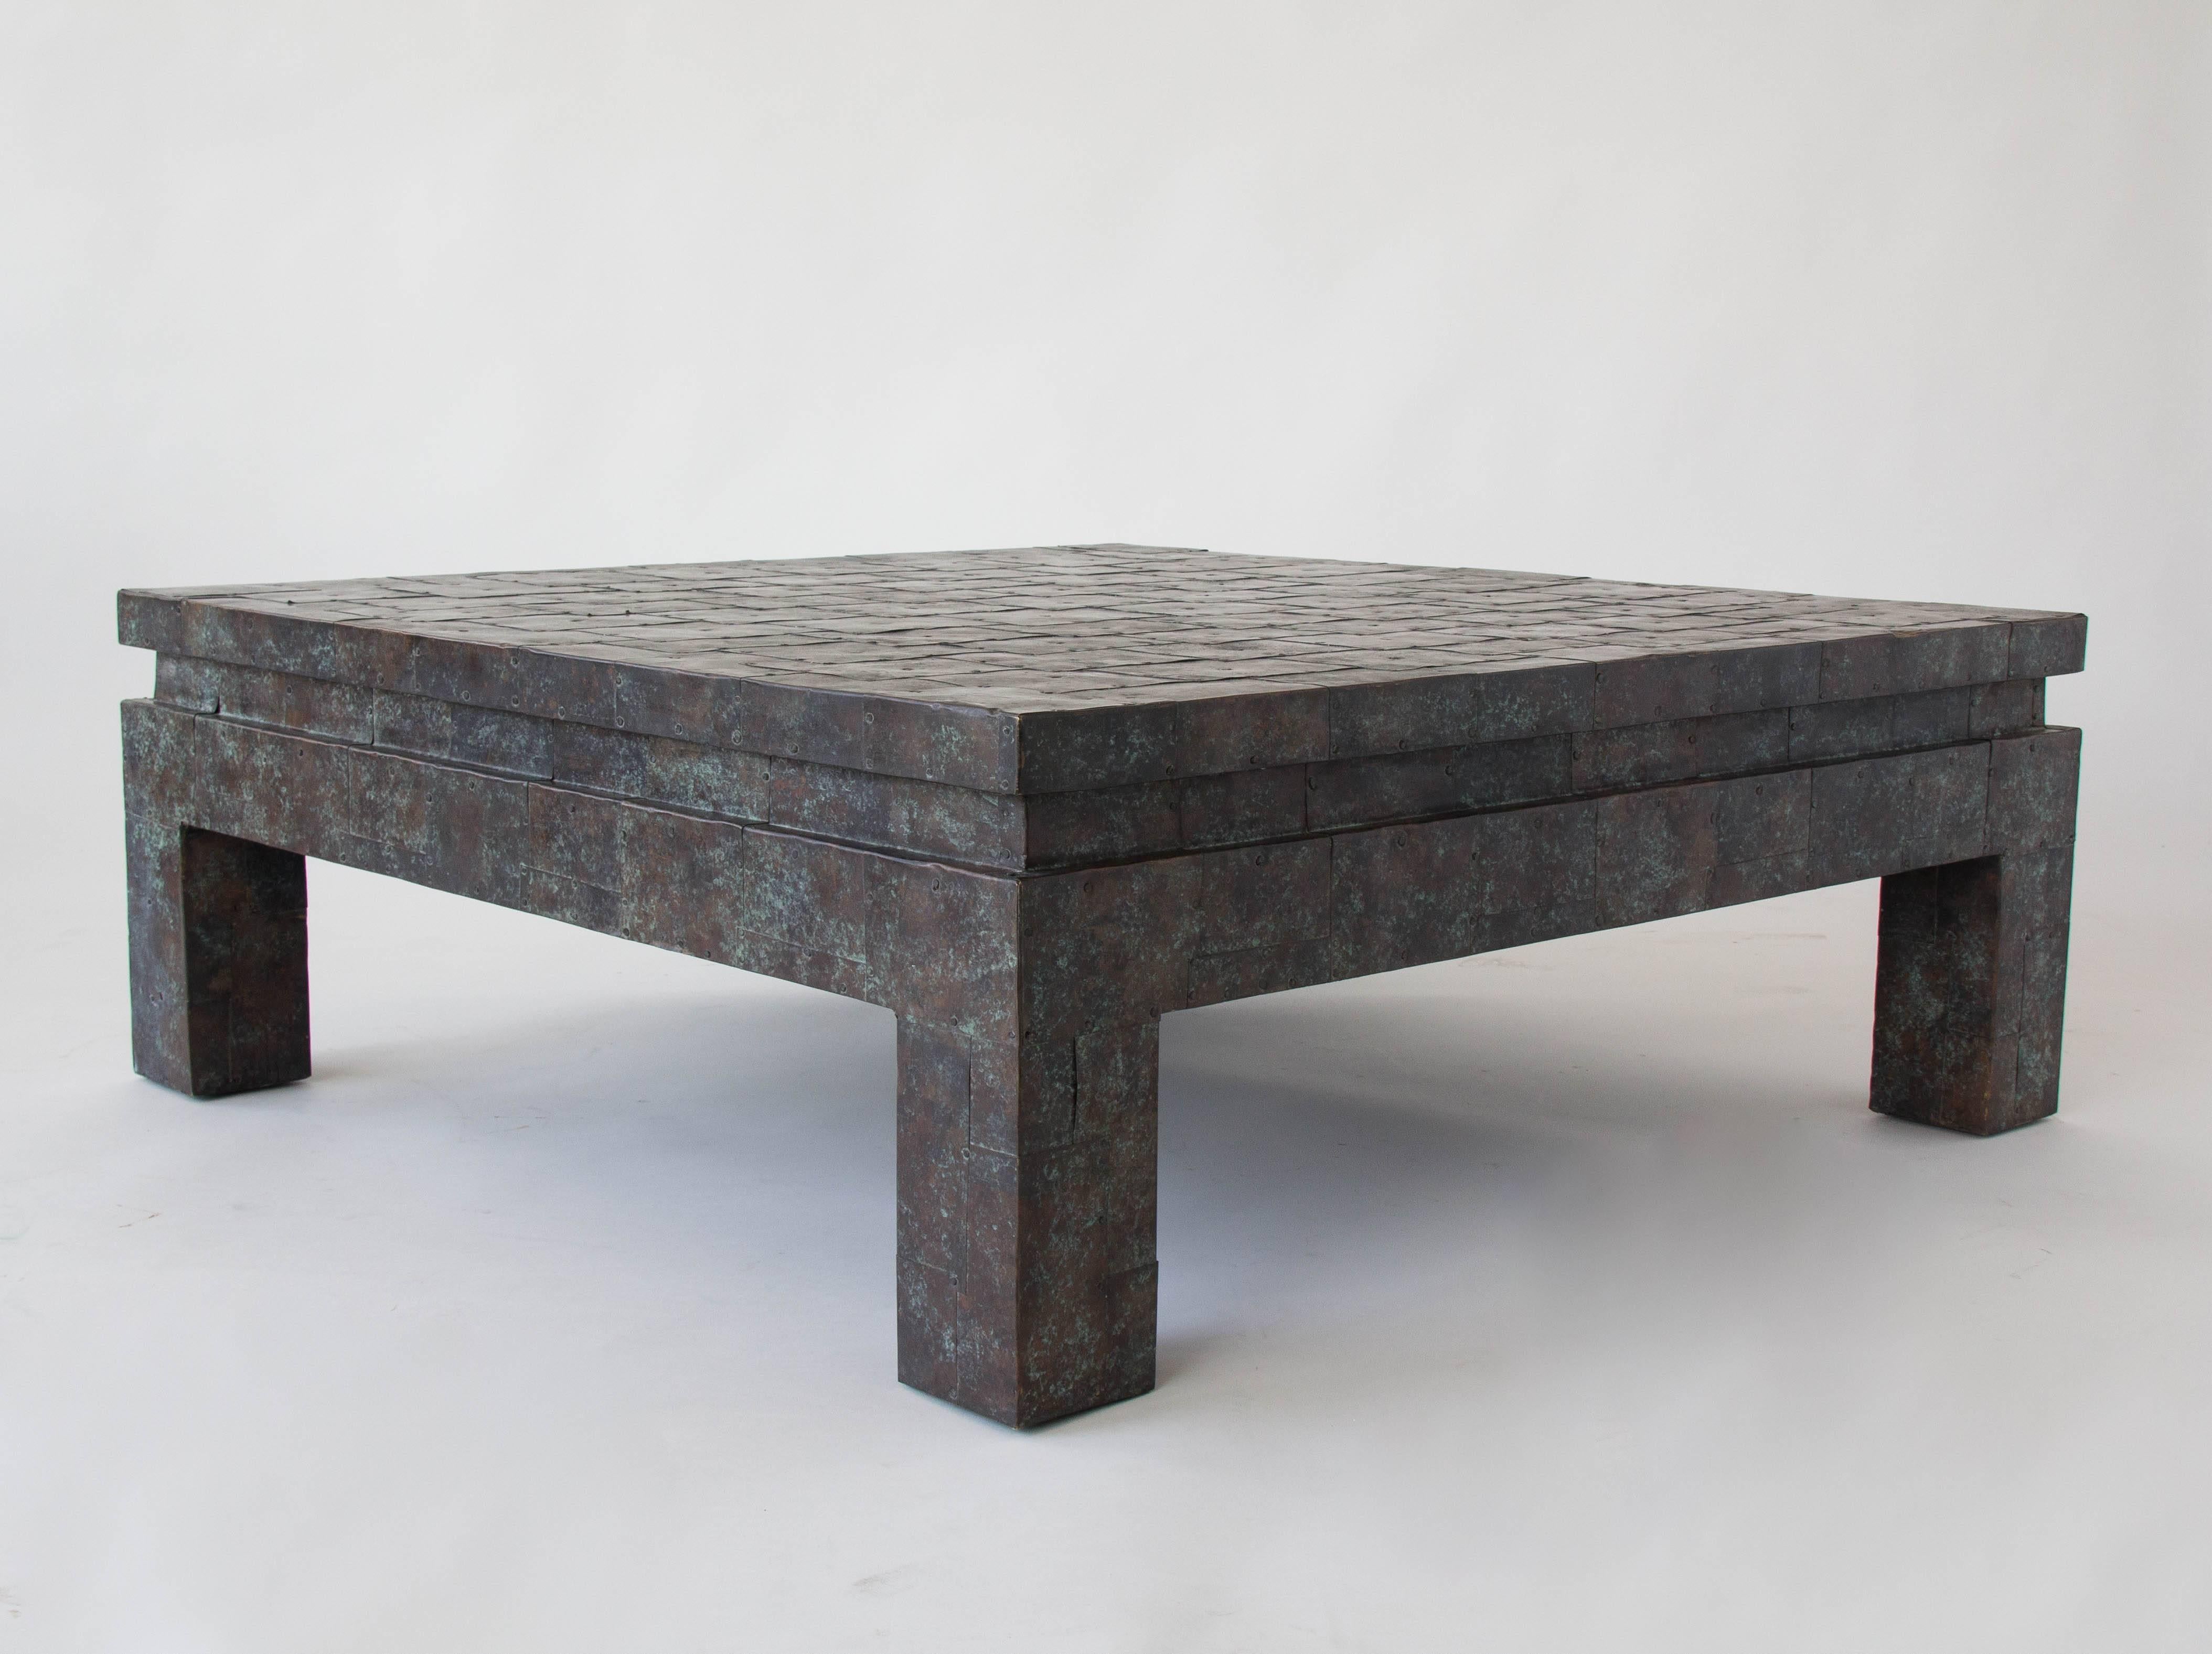 Modern Square Coffee Table with Copper Patchwork Finish by Maitland-Smith